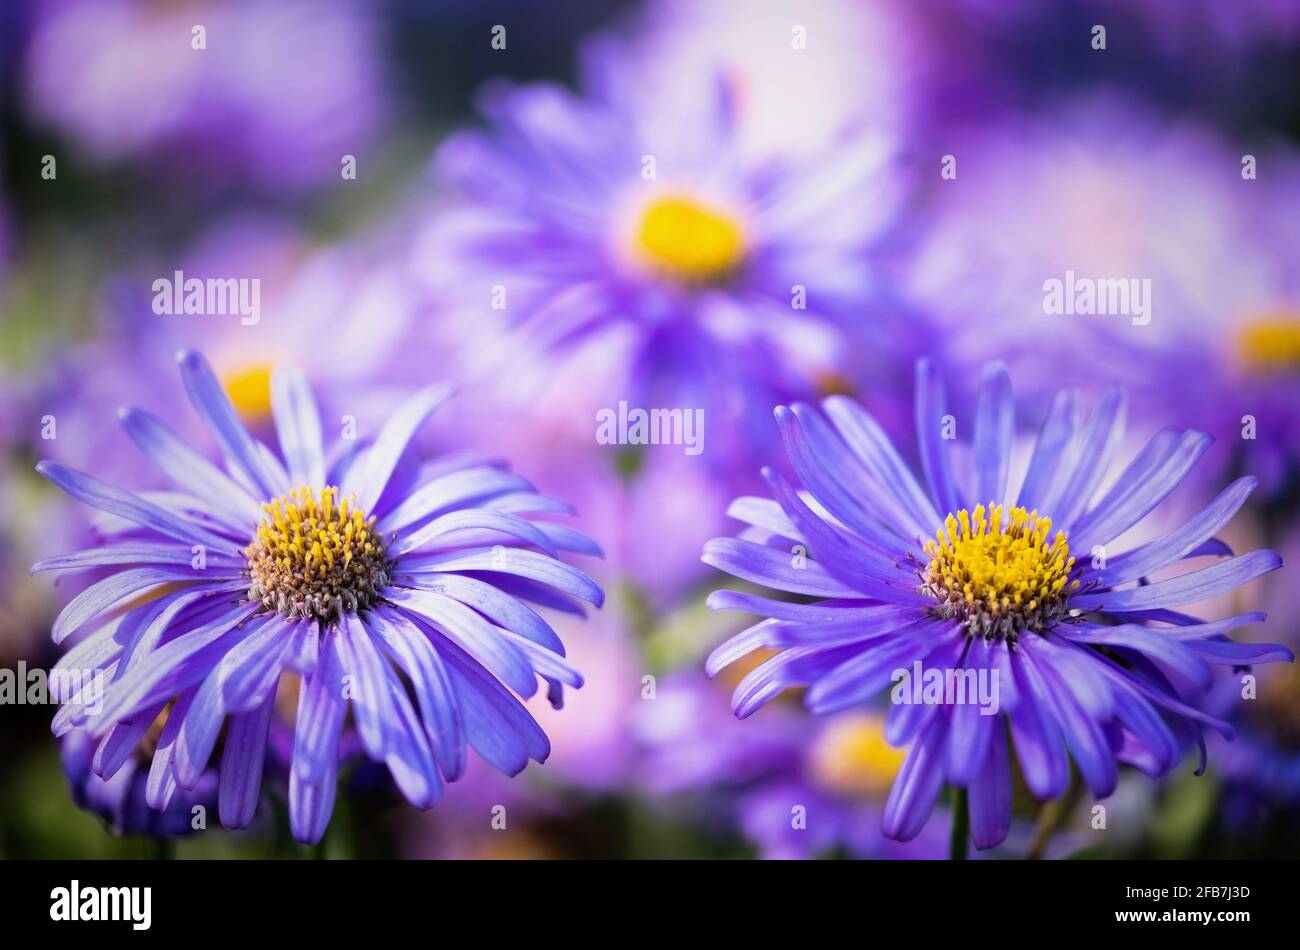 Asters, Asteraceae, Close-up view of two purple flowers with yellow stamen. Stock Photo